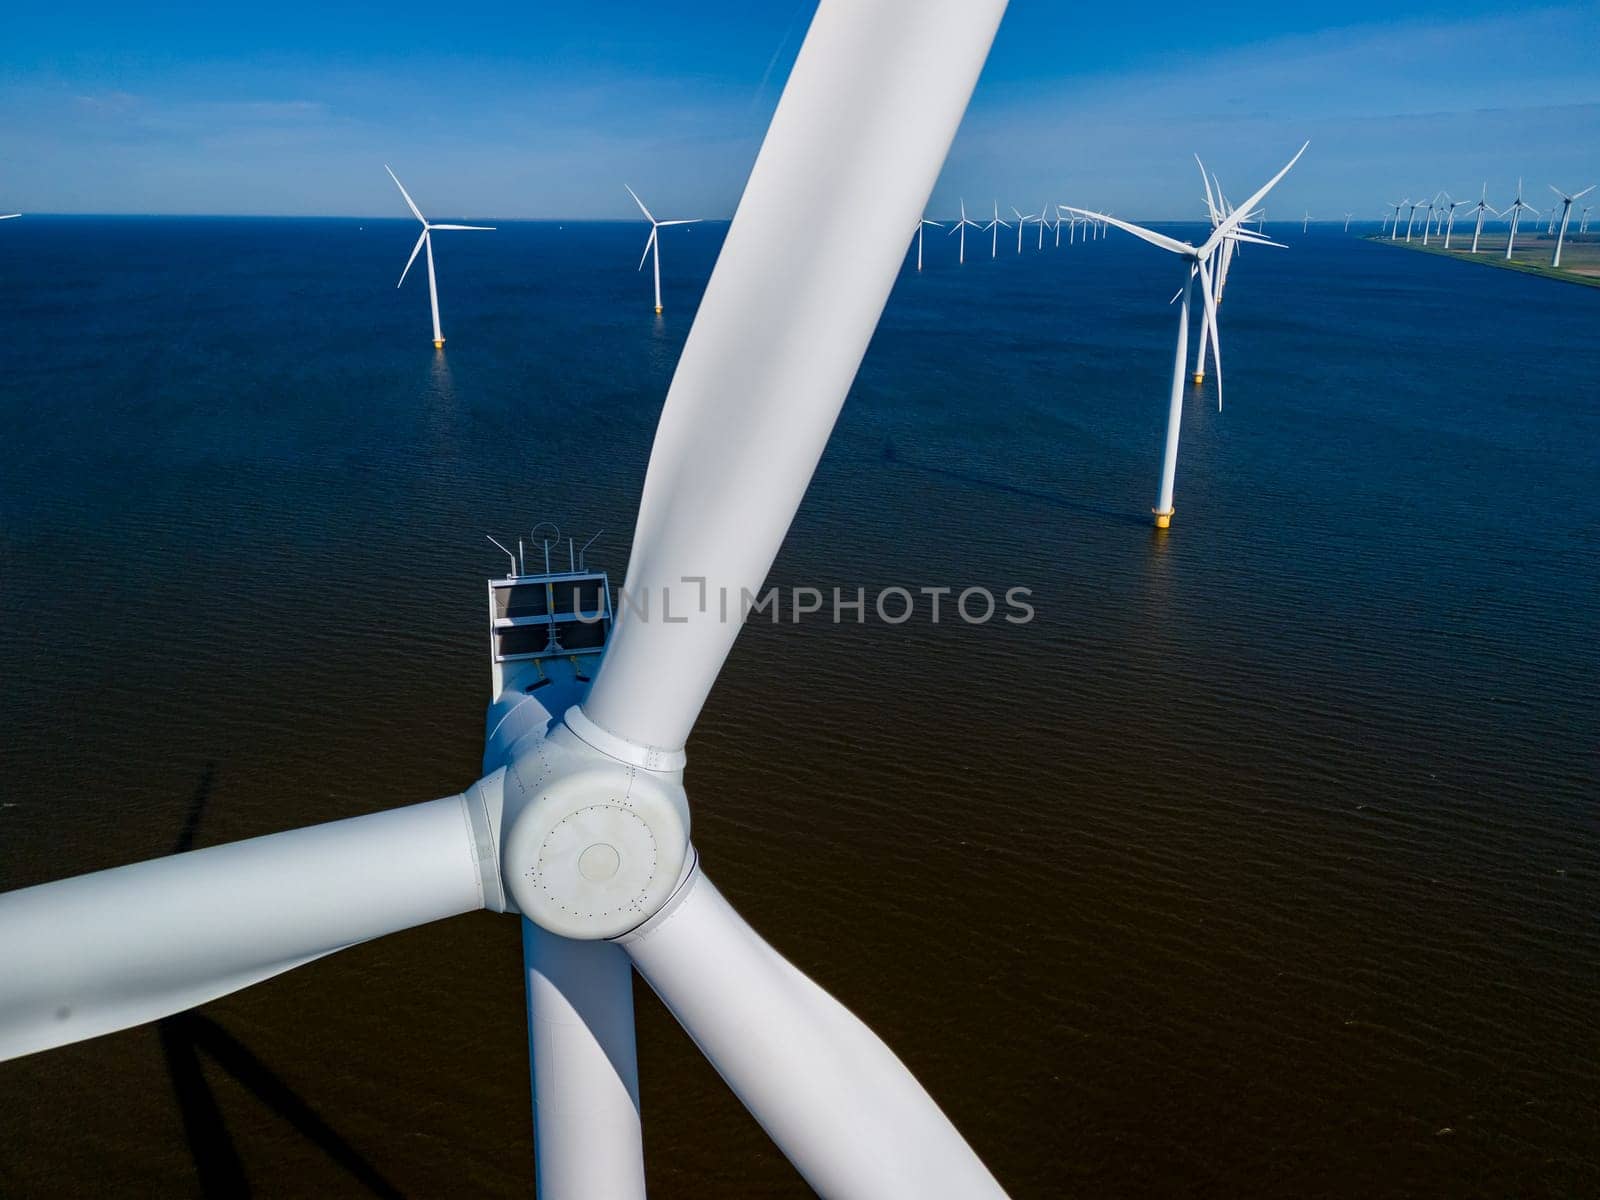 windmill turbines energy from the wind in the middle of a vast body of water in the Netherlands by fokkebok